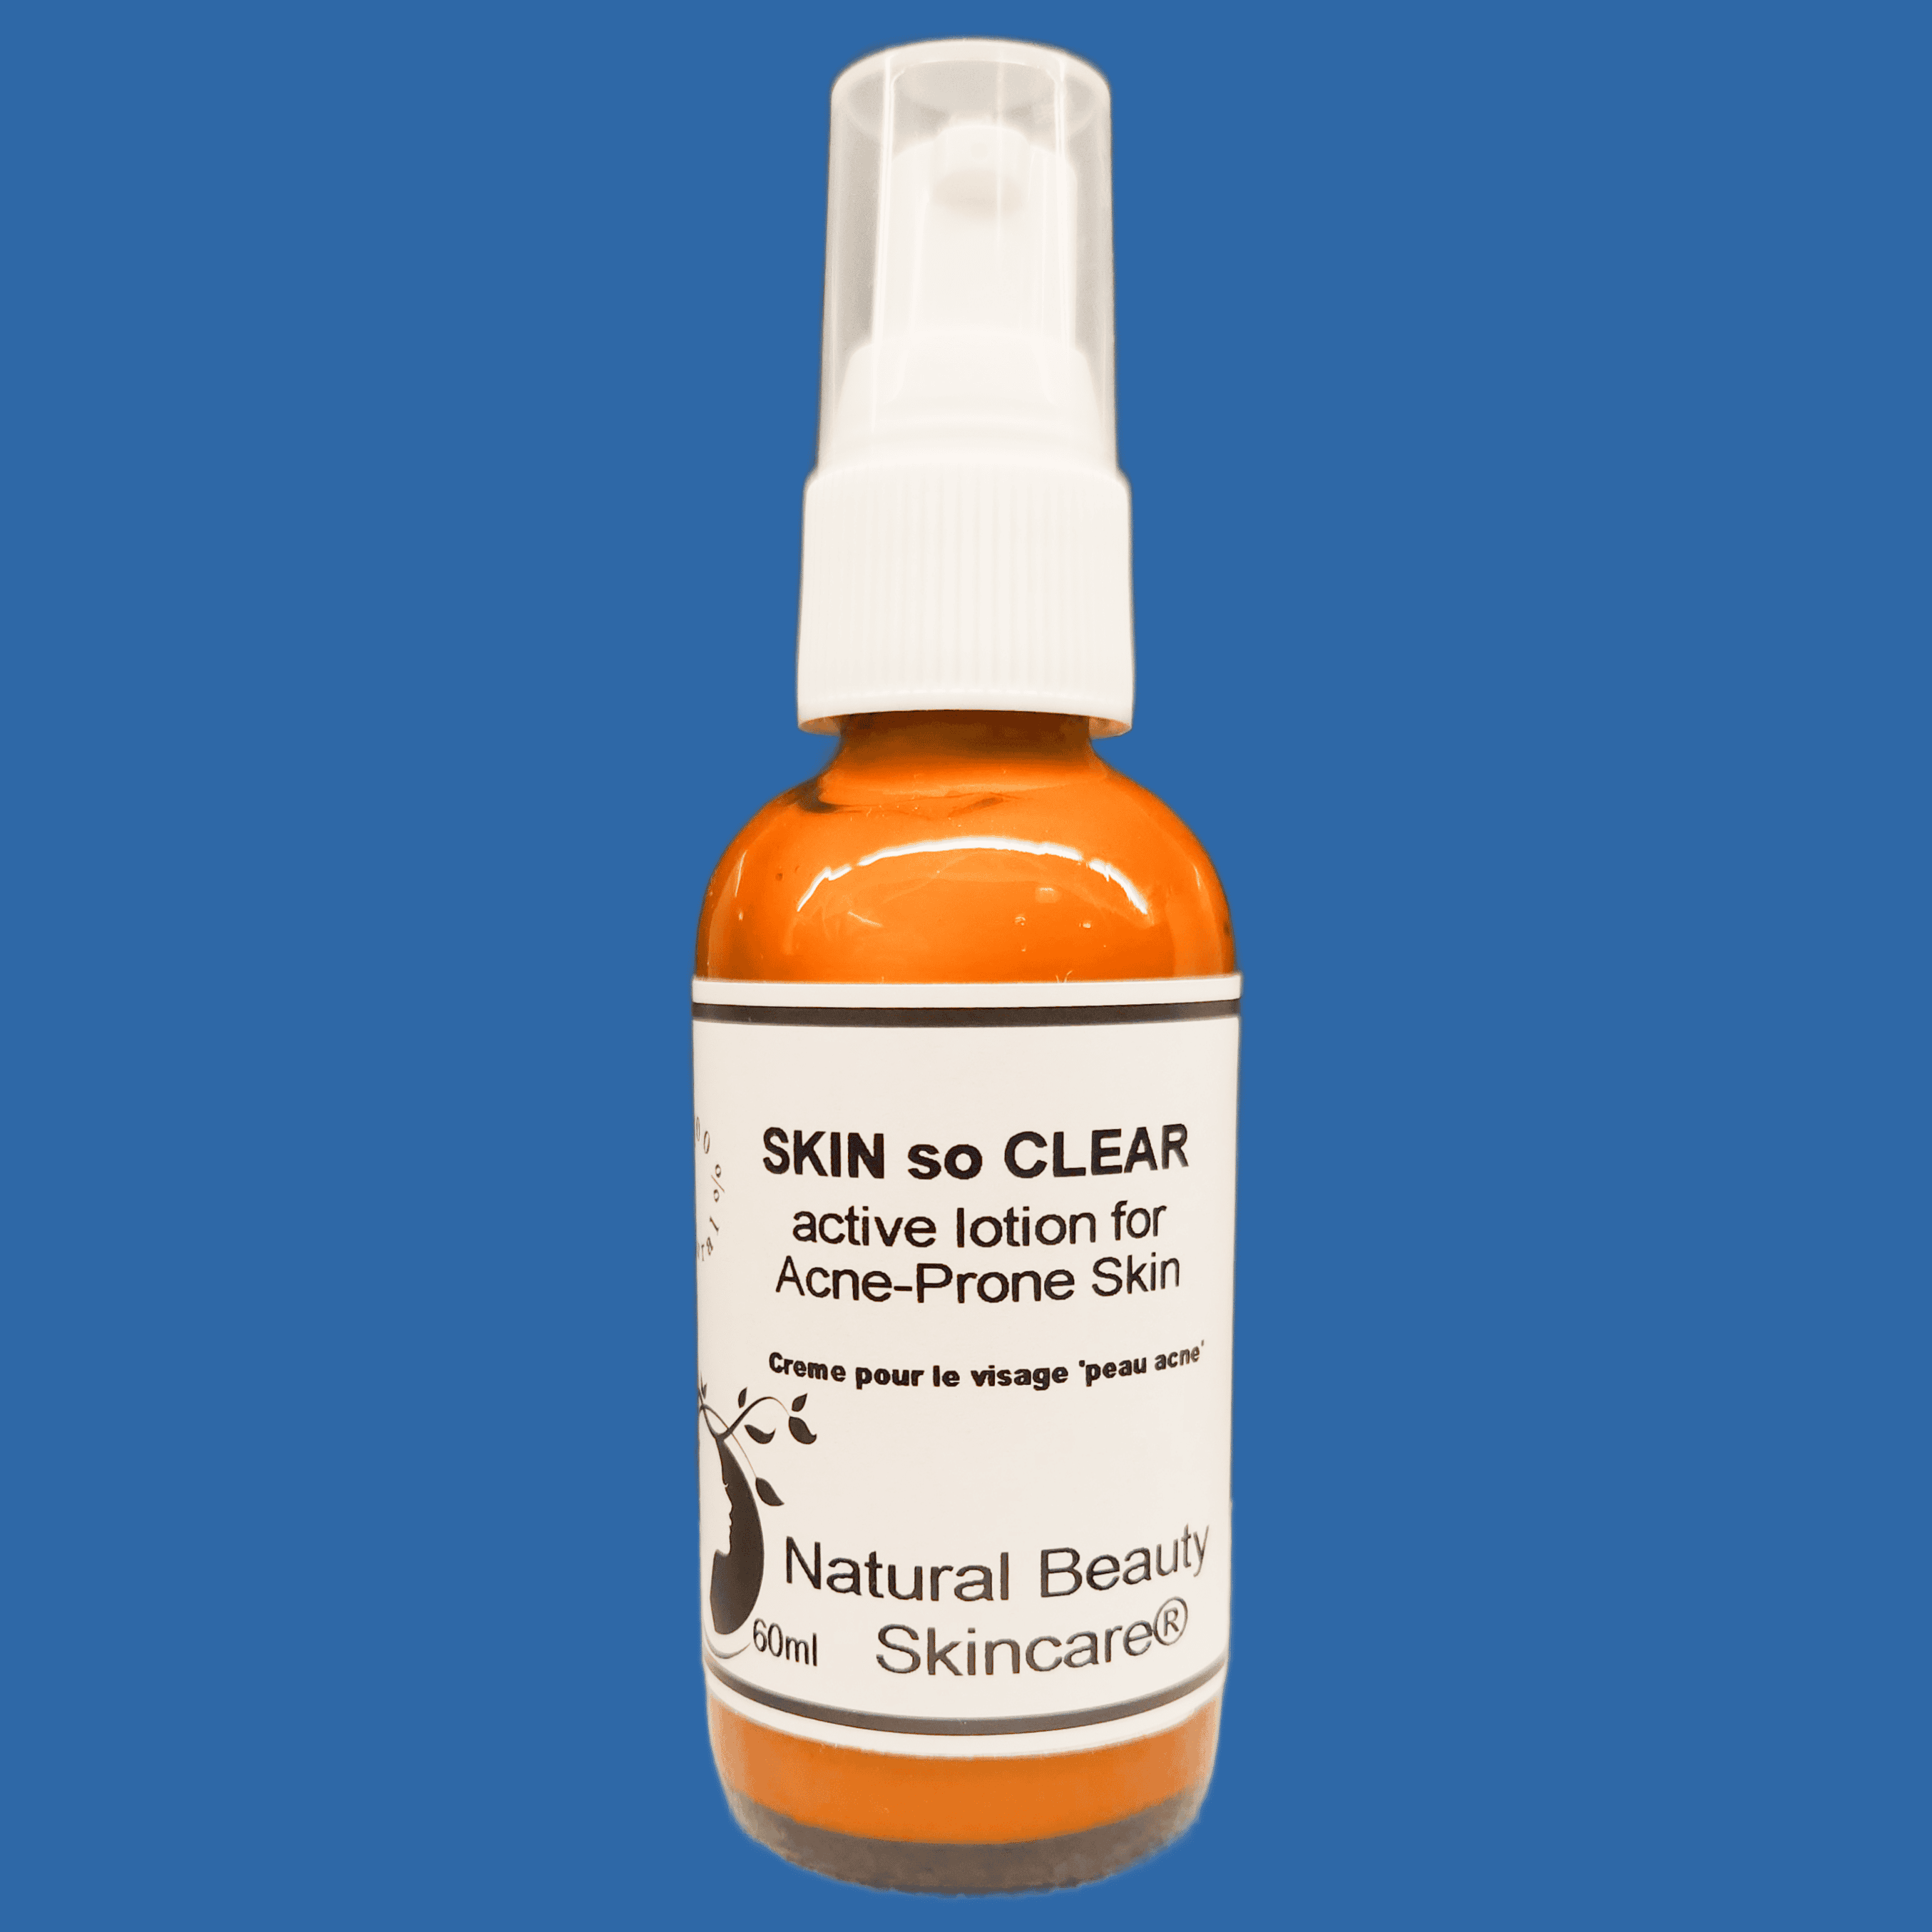 SKIN so CLEAR™ Face Therapy for Acne-Prone Skin